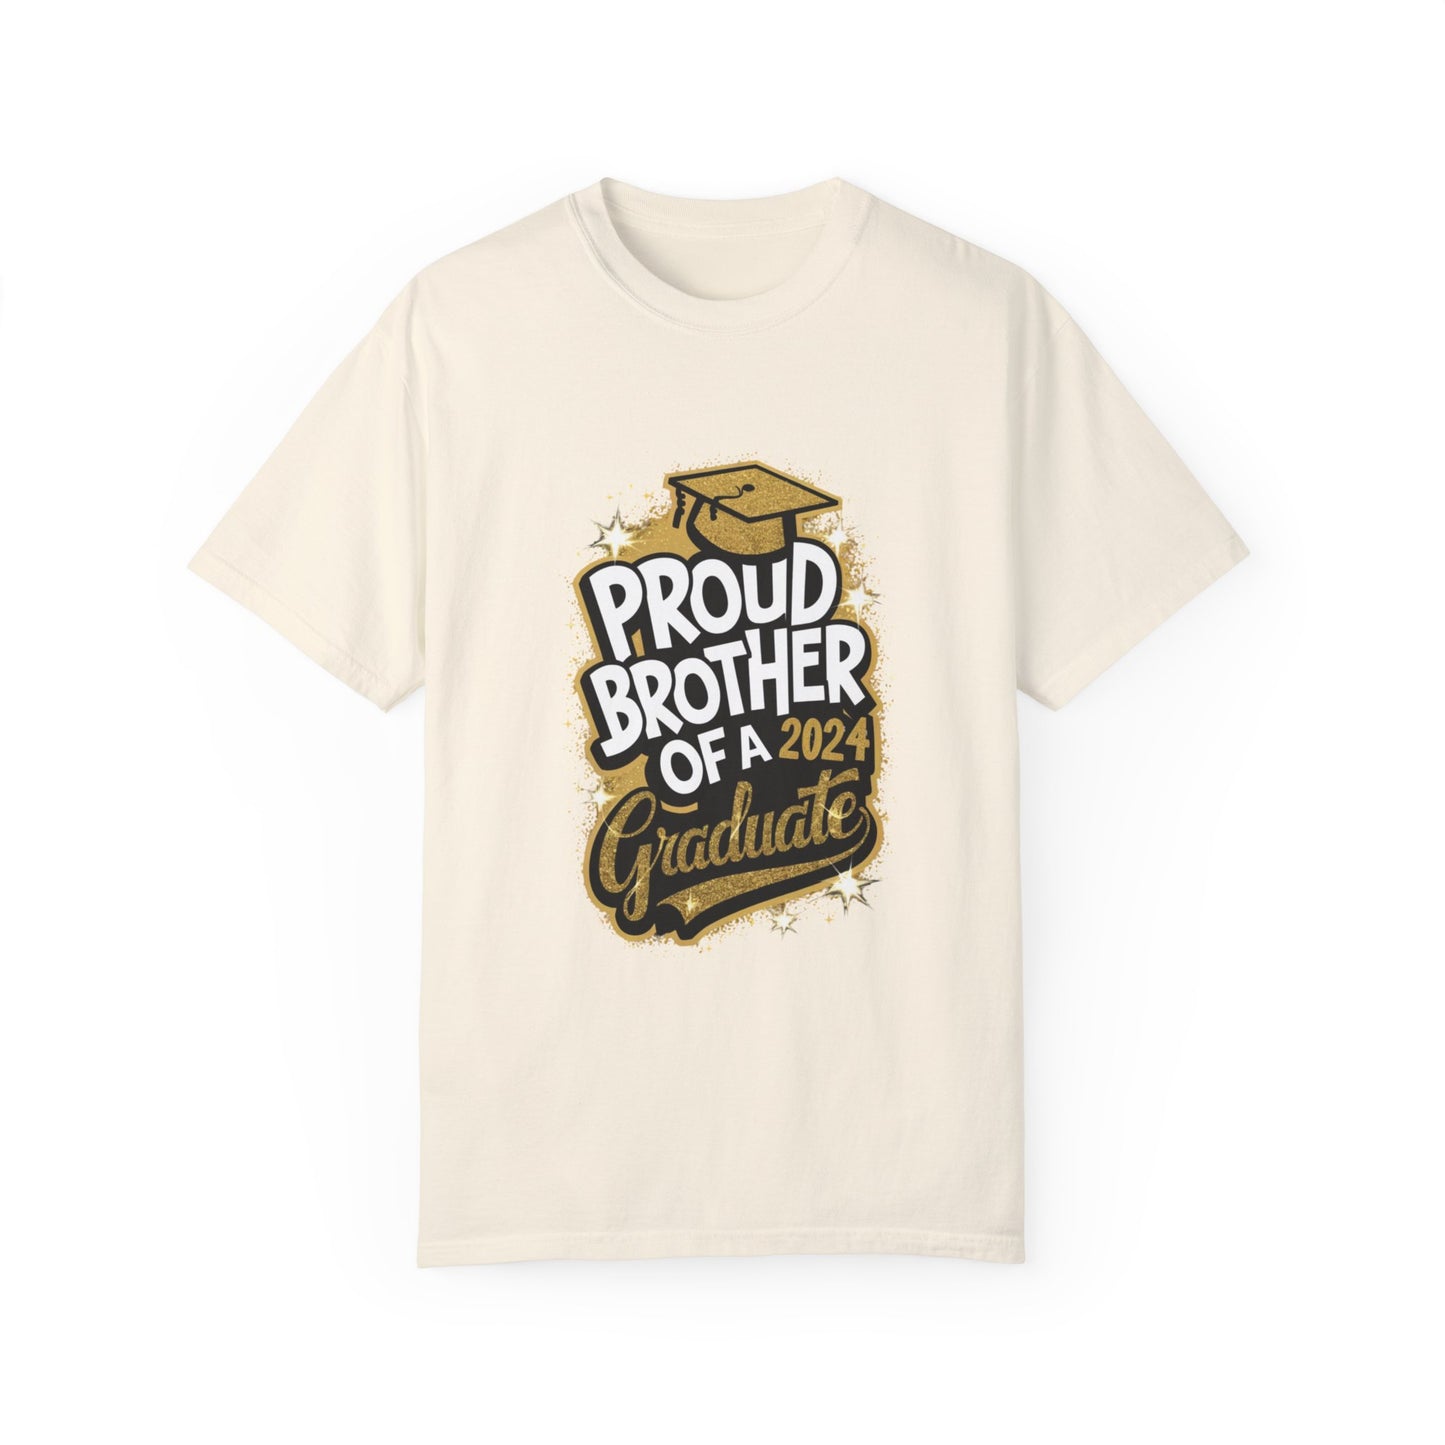 Proud Brother of a 2024 Graduate Unisex Garment-dyed T-shirt Cotton Funny Humorous Graphic Soft Premium Unisex Men Women Ivory T-shirt Birthday Gift-10